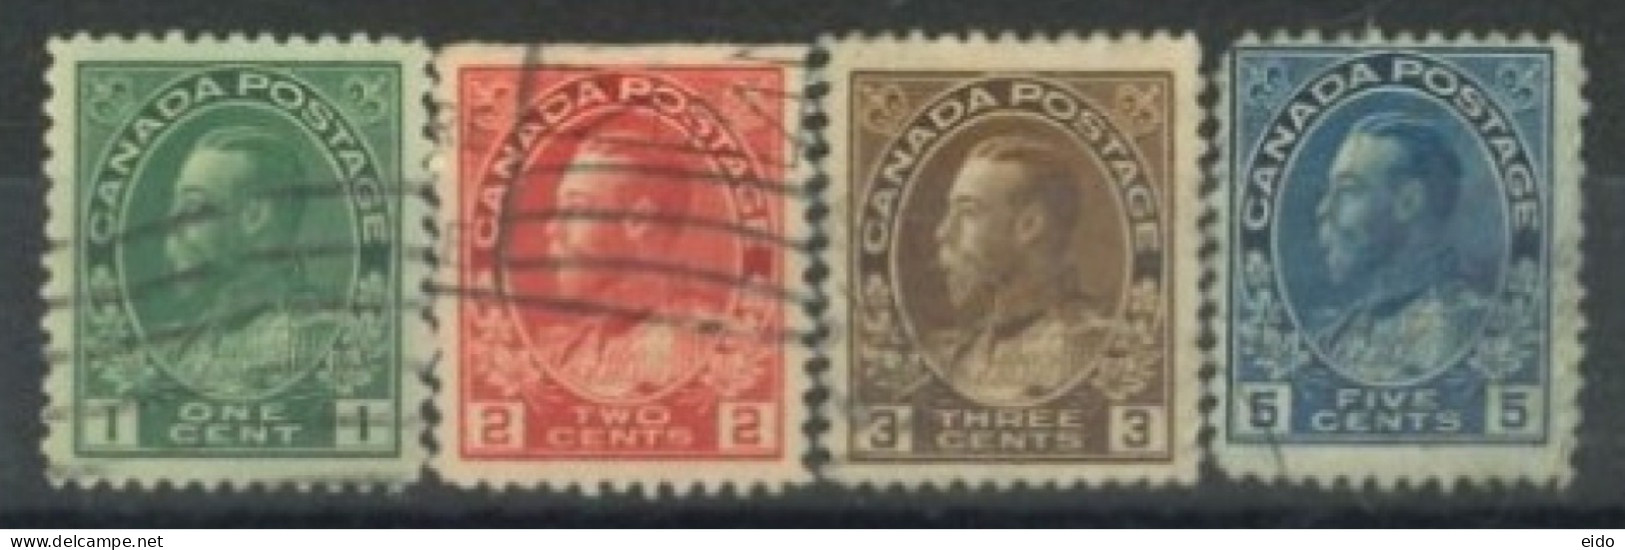 CANADA - 1912, KING GEORGE V STAMPS SET OF 4, USED. - Gebraucht